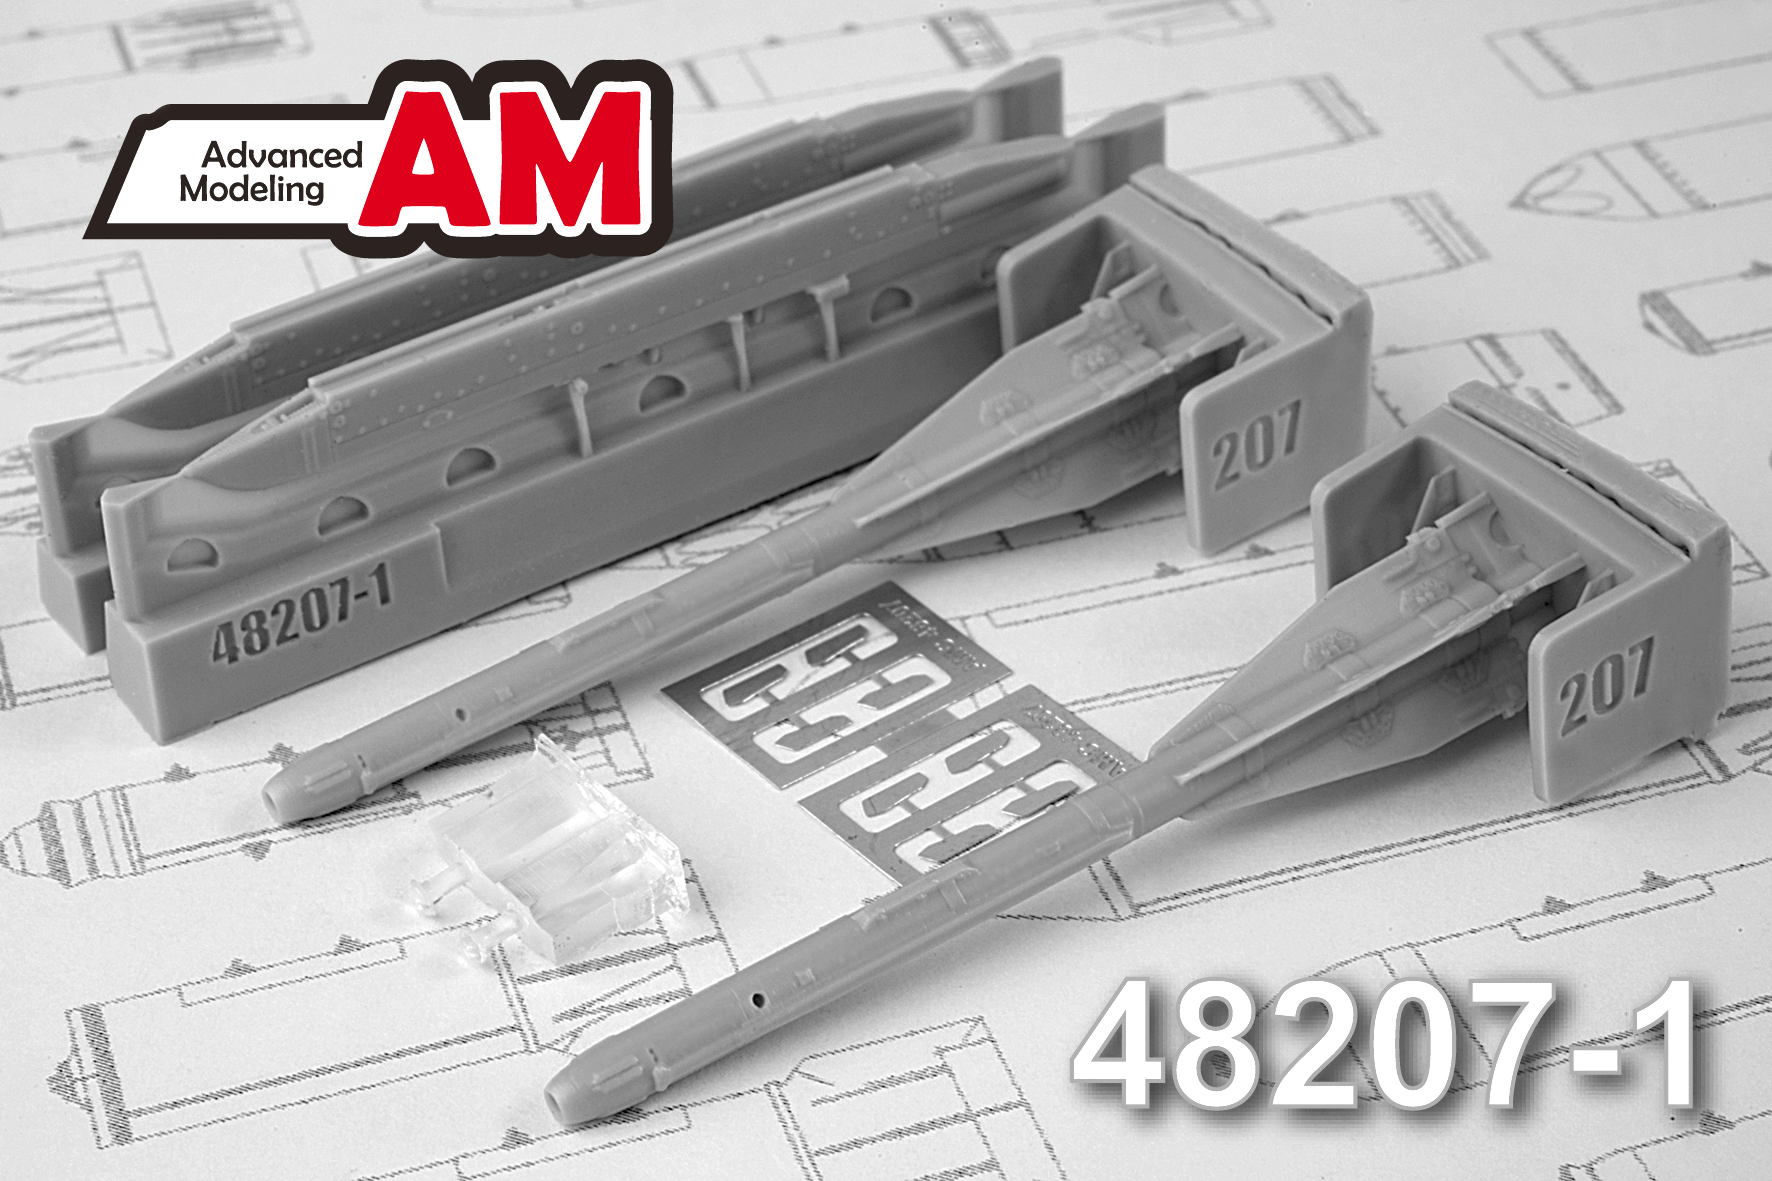 Additions (3D resin printing) 1/48 R-60 aircraft guided missile with P-62-1 launcher (Advanced Modeling) 